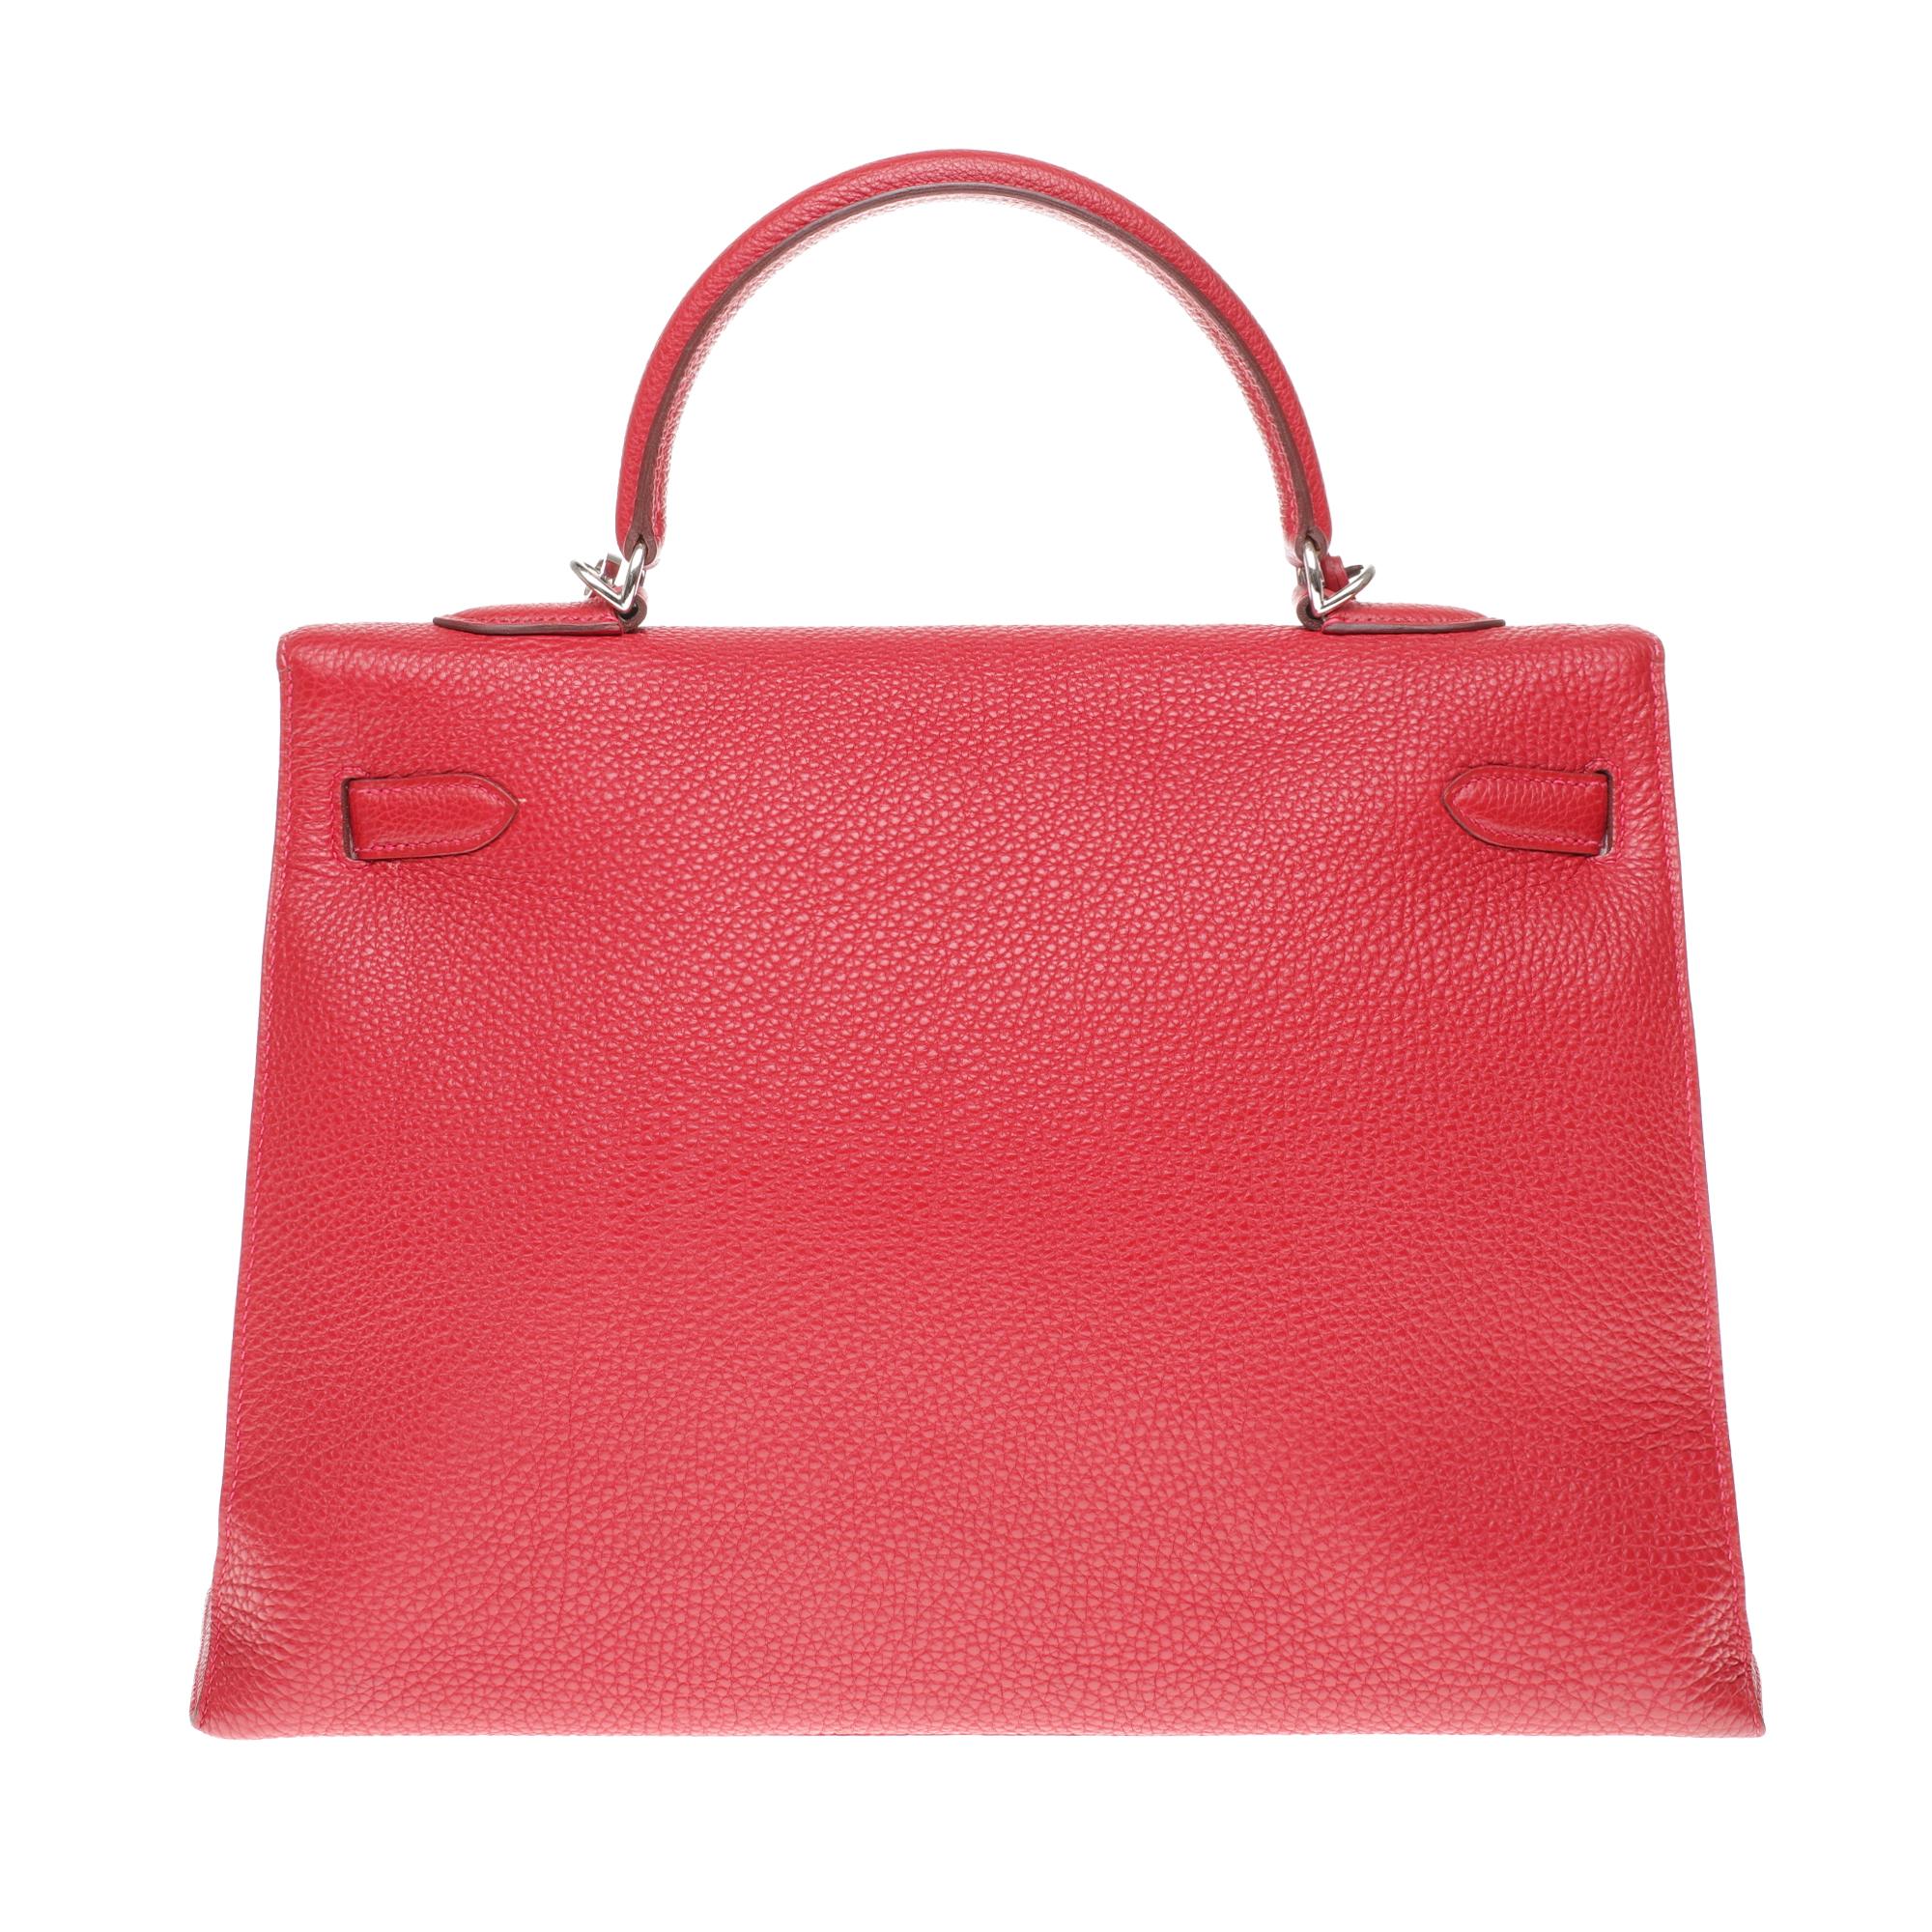 Rare Kelly in Togo leather and saddle stitching in such a bright color!

Beautiful Hermes Kelly 32 cm saddle-stitched bag in red Togo leather with silver plated metal , removable shoulder strap in red Togo, single red leather handle for a handheld